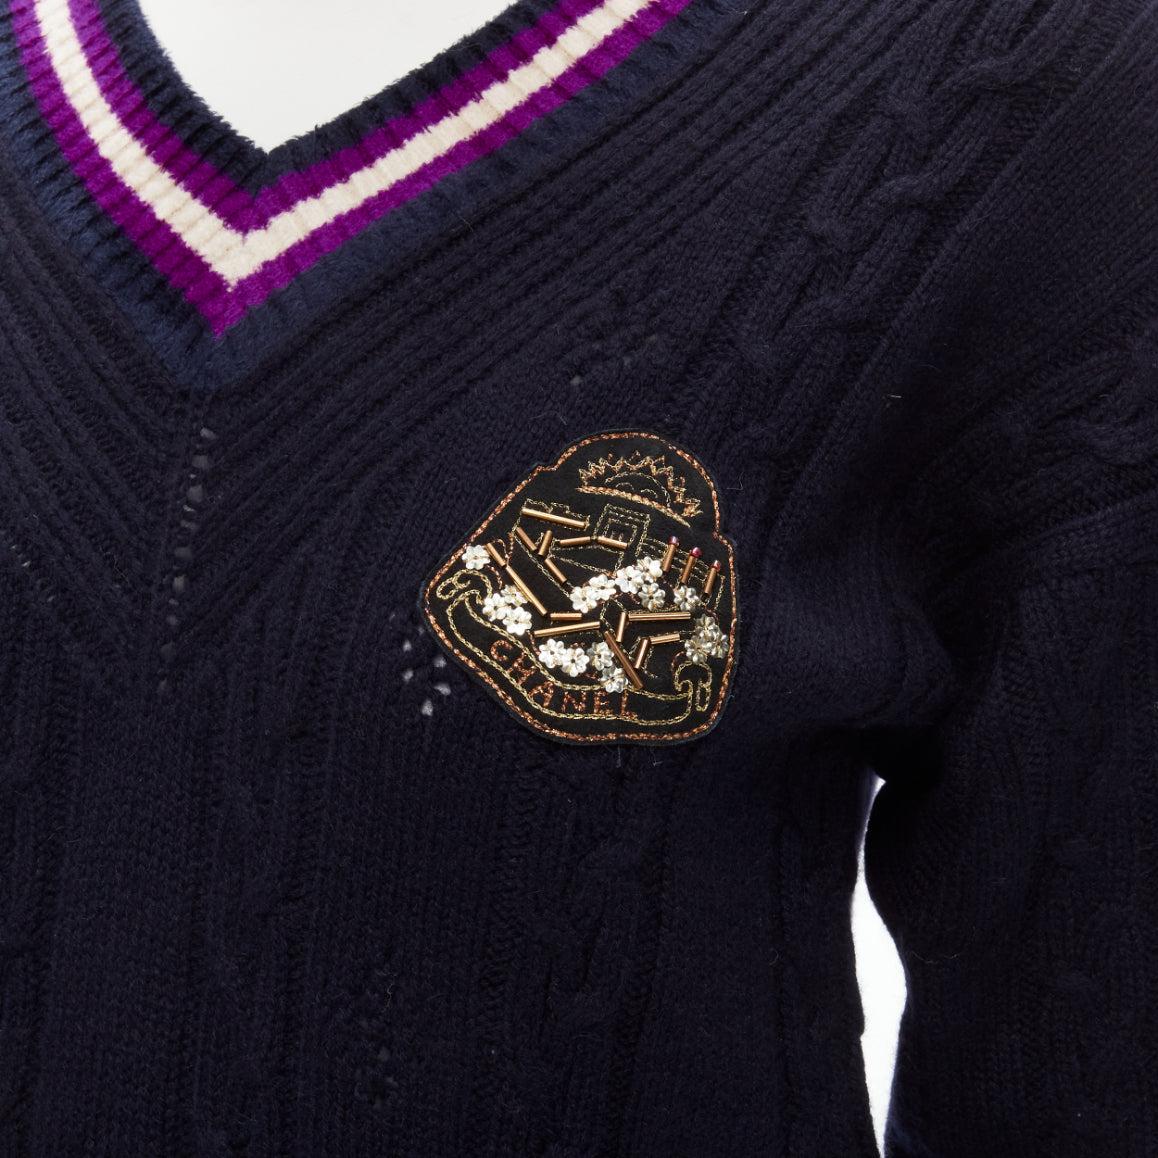 CHANEL cashmere blend navy purple embroidered badge schoolboy sweater FR38 M
Reference: TGAS/C01364
Brand: Chanel
Designer: Karl Lagerfeld
Material: Cashmere, Rayon, Nylon
Color: Navy, Purple
Pattern: Solid
Extra Details: Purple white striped trim.